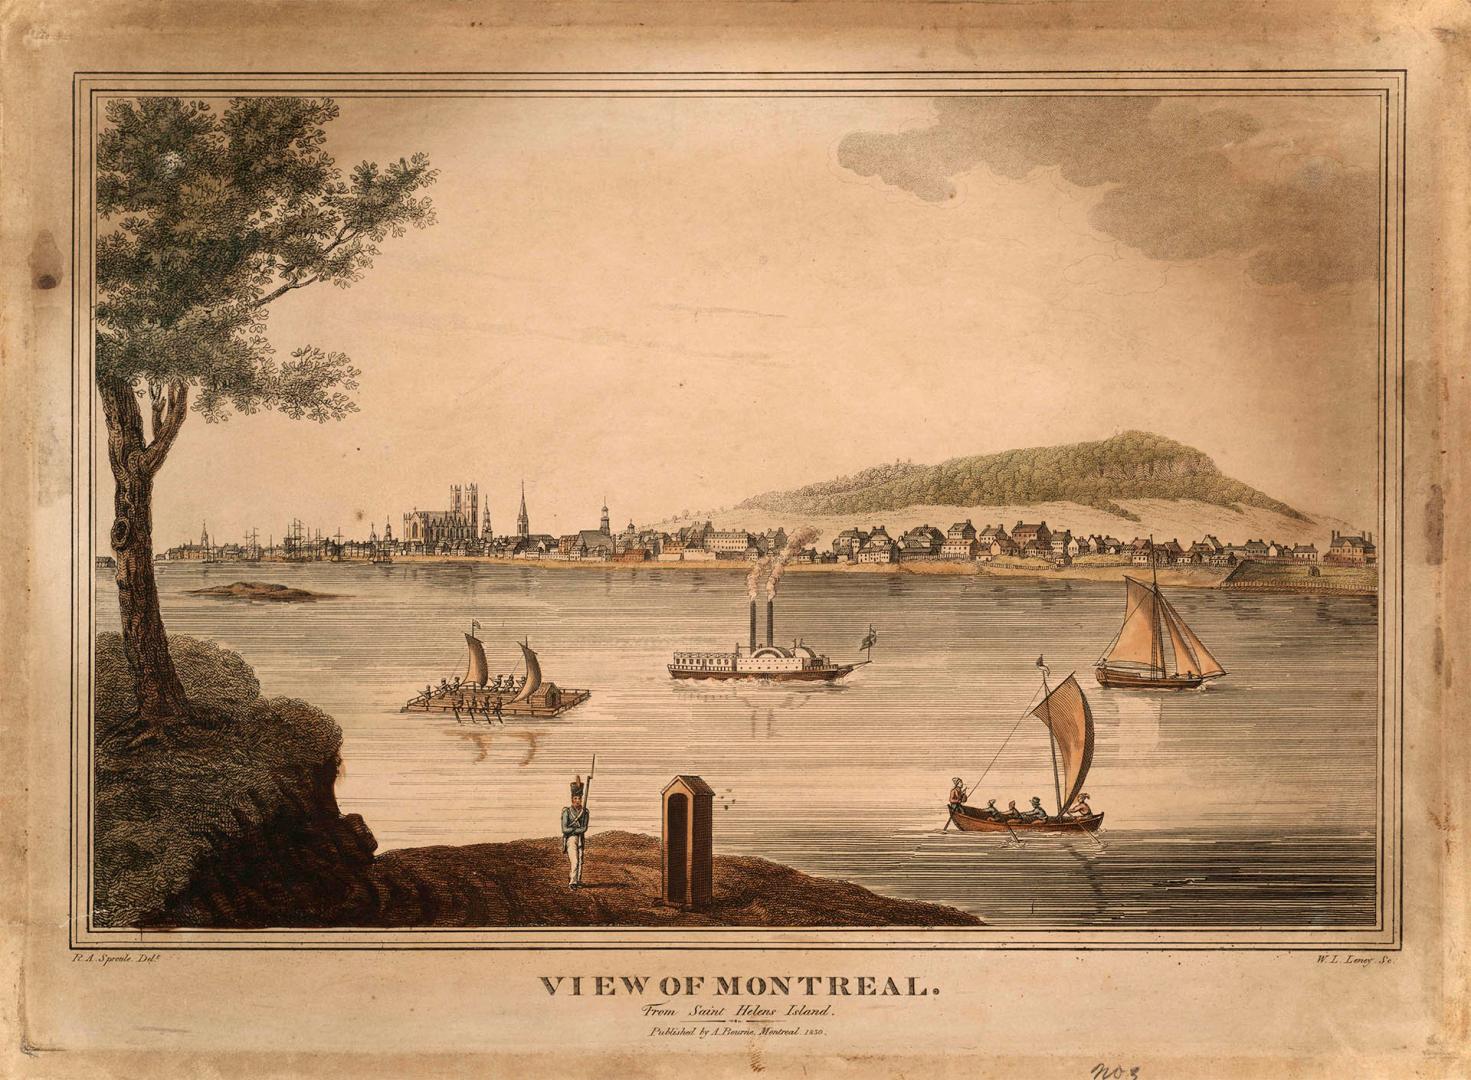 View of Montreal, from Saint Helen's Island